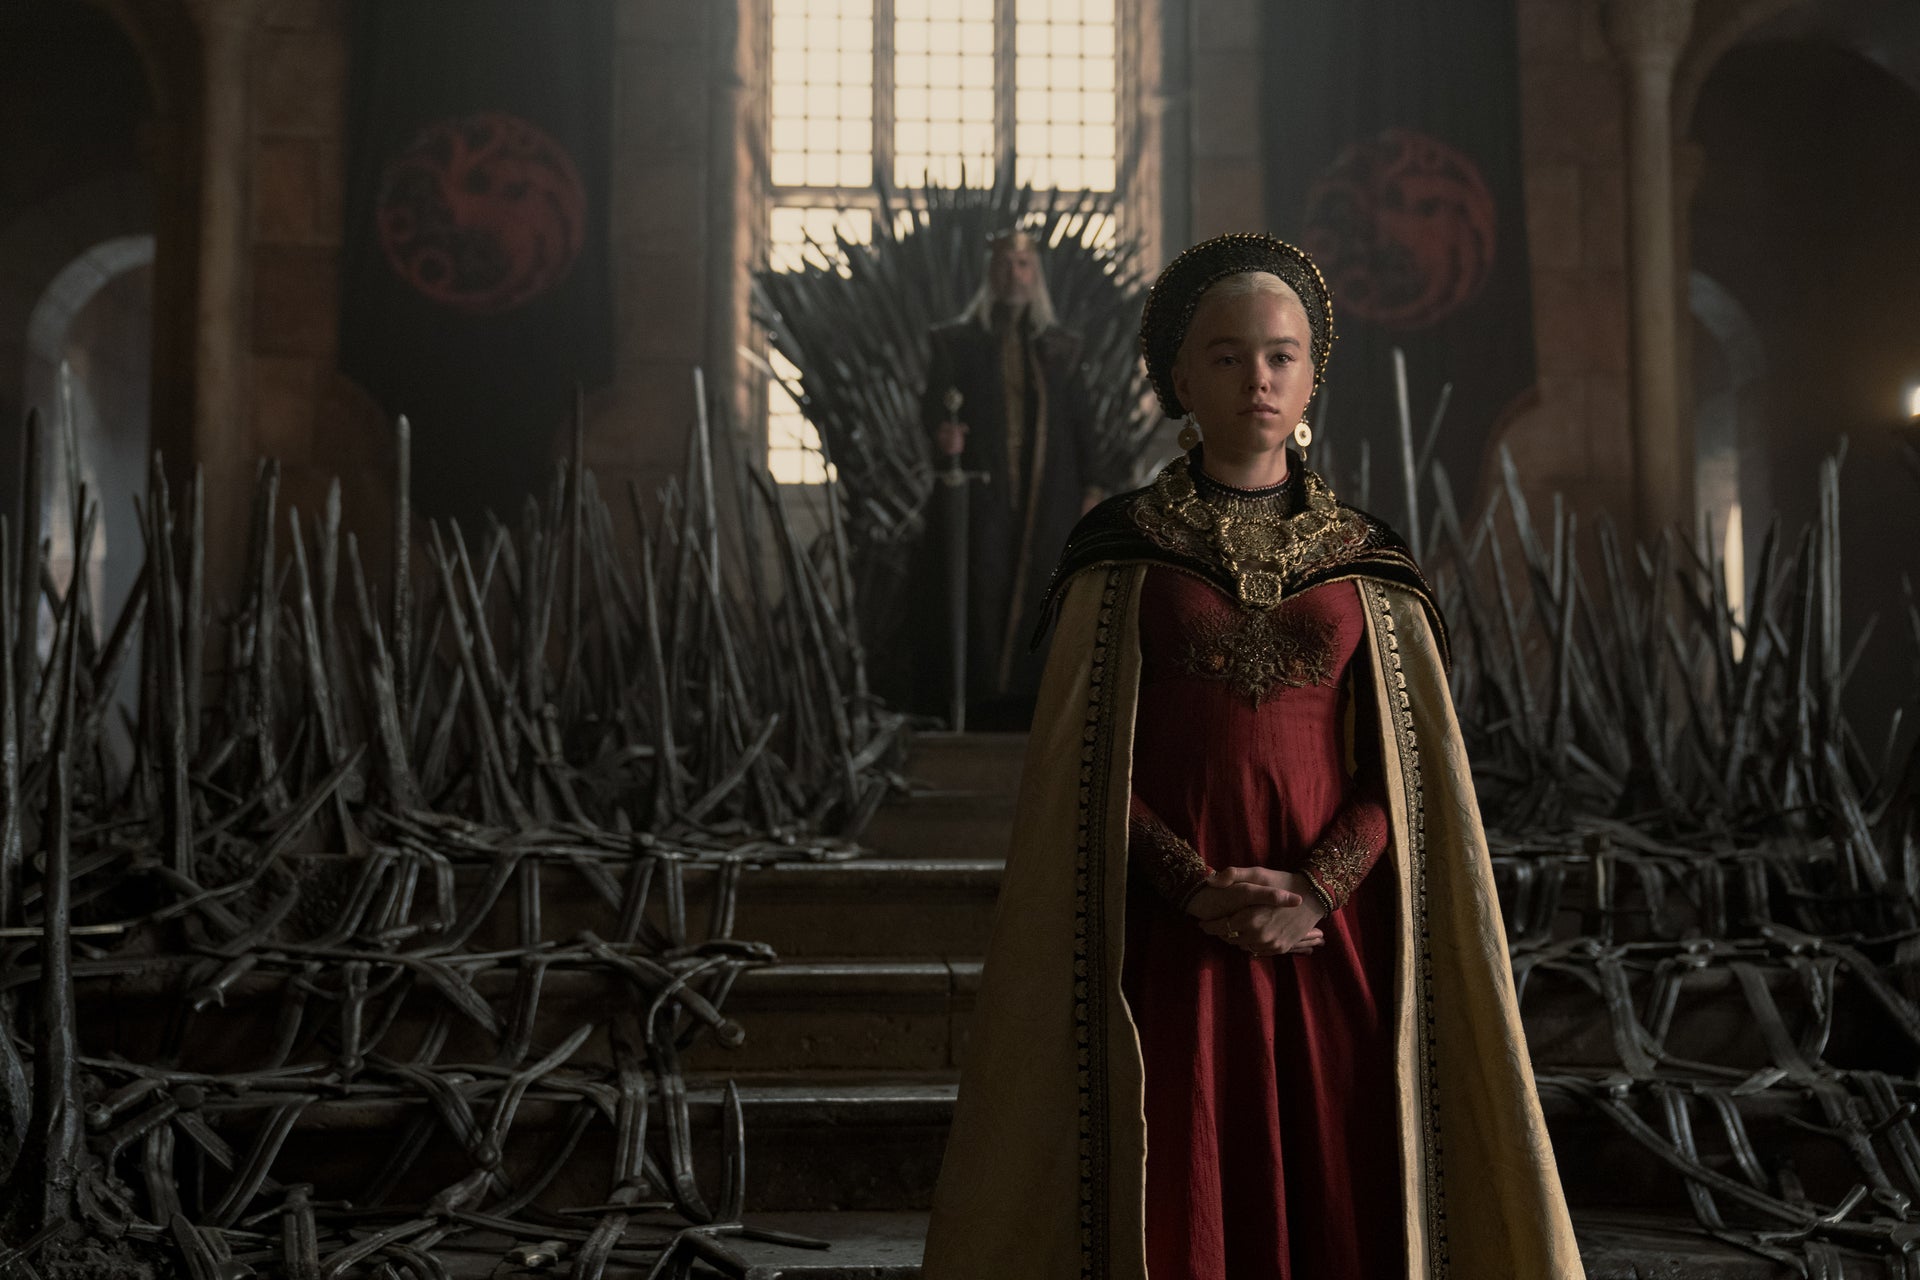 The young woman stands at the bottom of the steps below the familiar Iron Throne, facing away from the king, seated behind her. She wears a gold cloak, a red dress, and a determined expression.